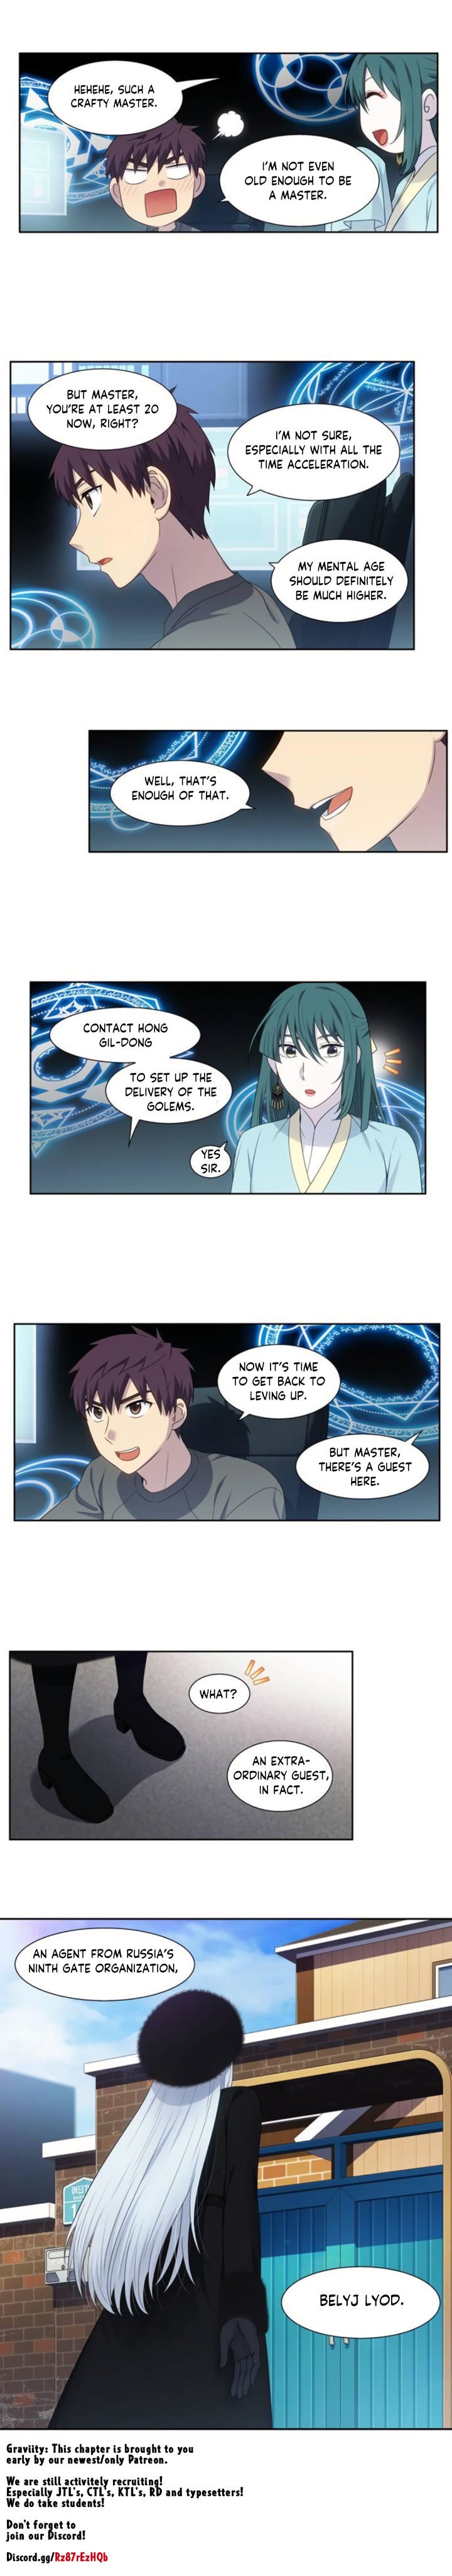 the-gamer-chap-357-8